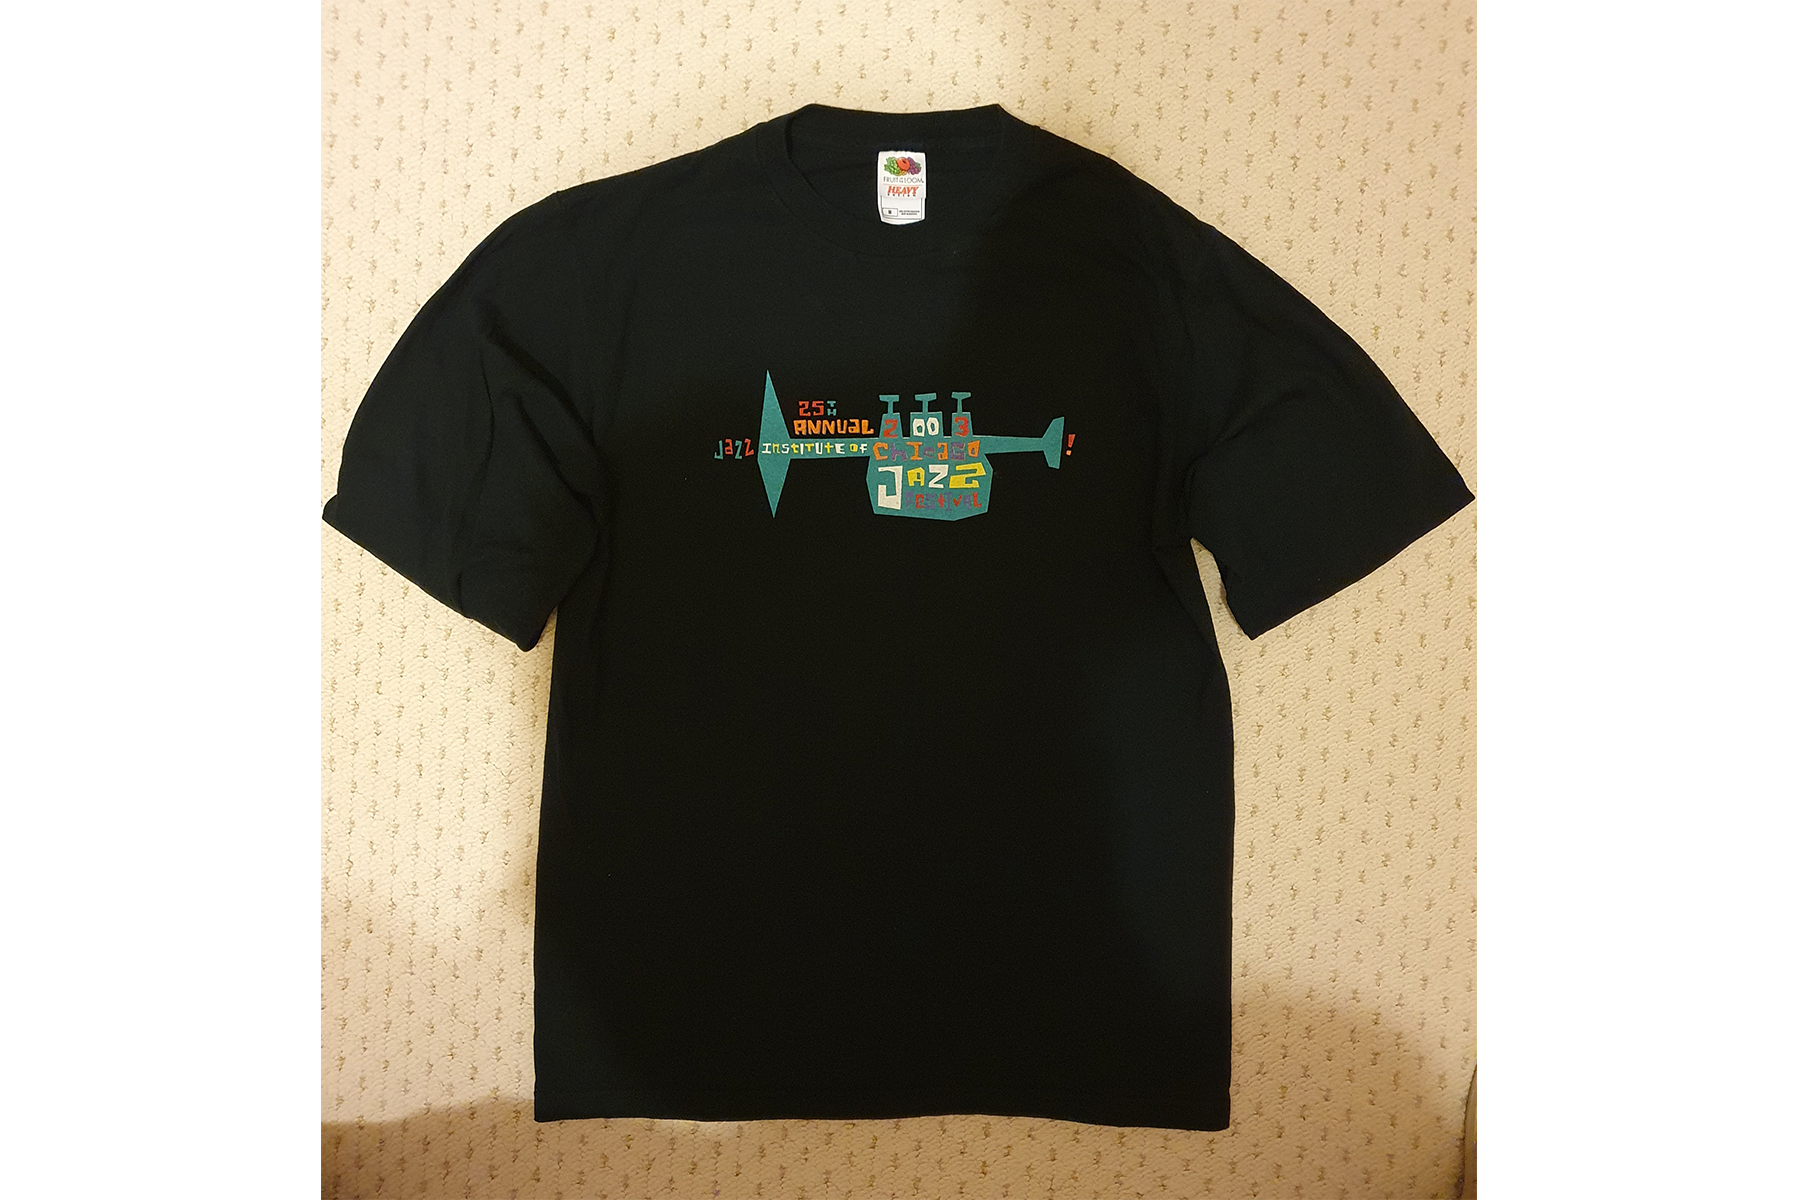 A fan's black T-shirt with a trumpet image on it, representing a Chicago Jazz Festival event